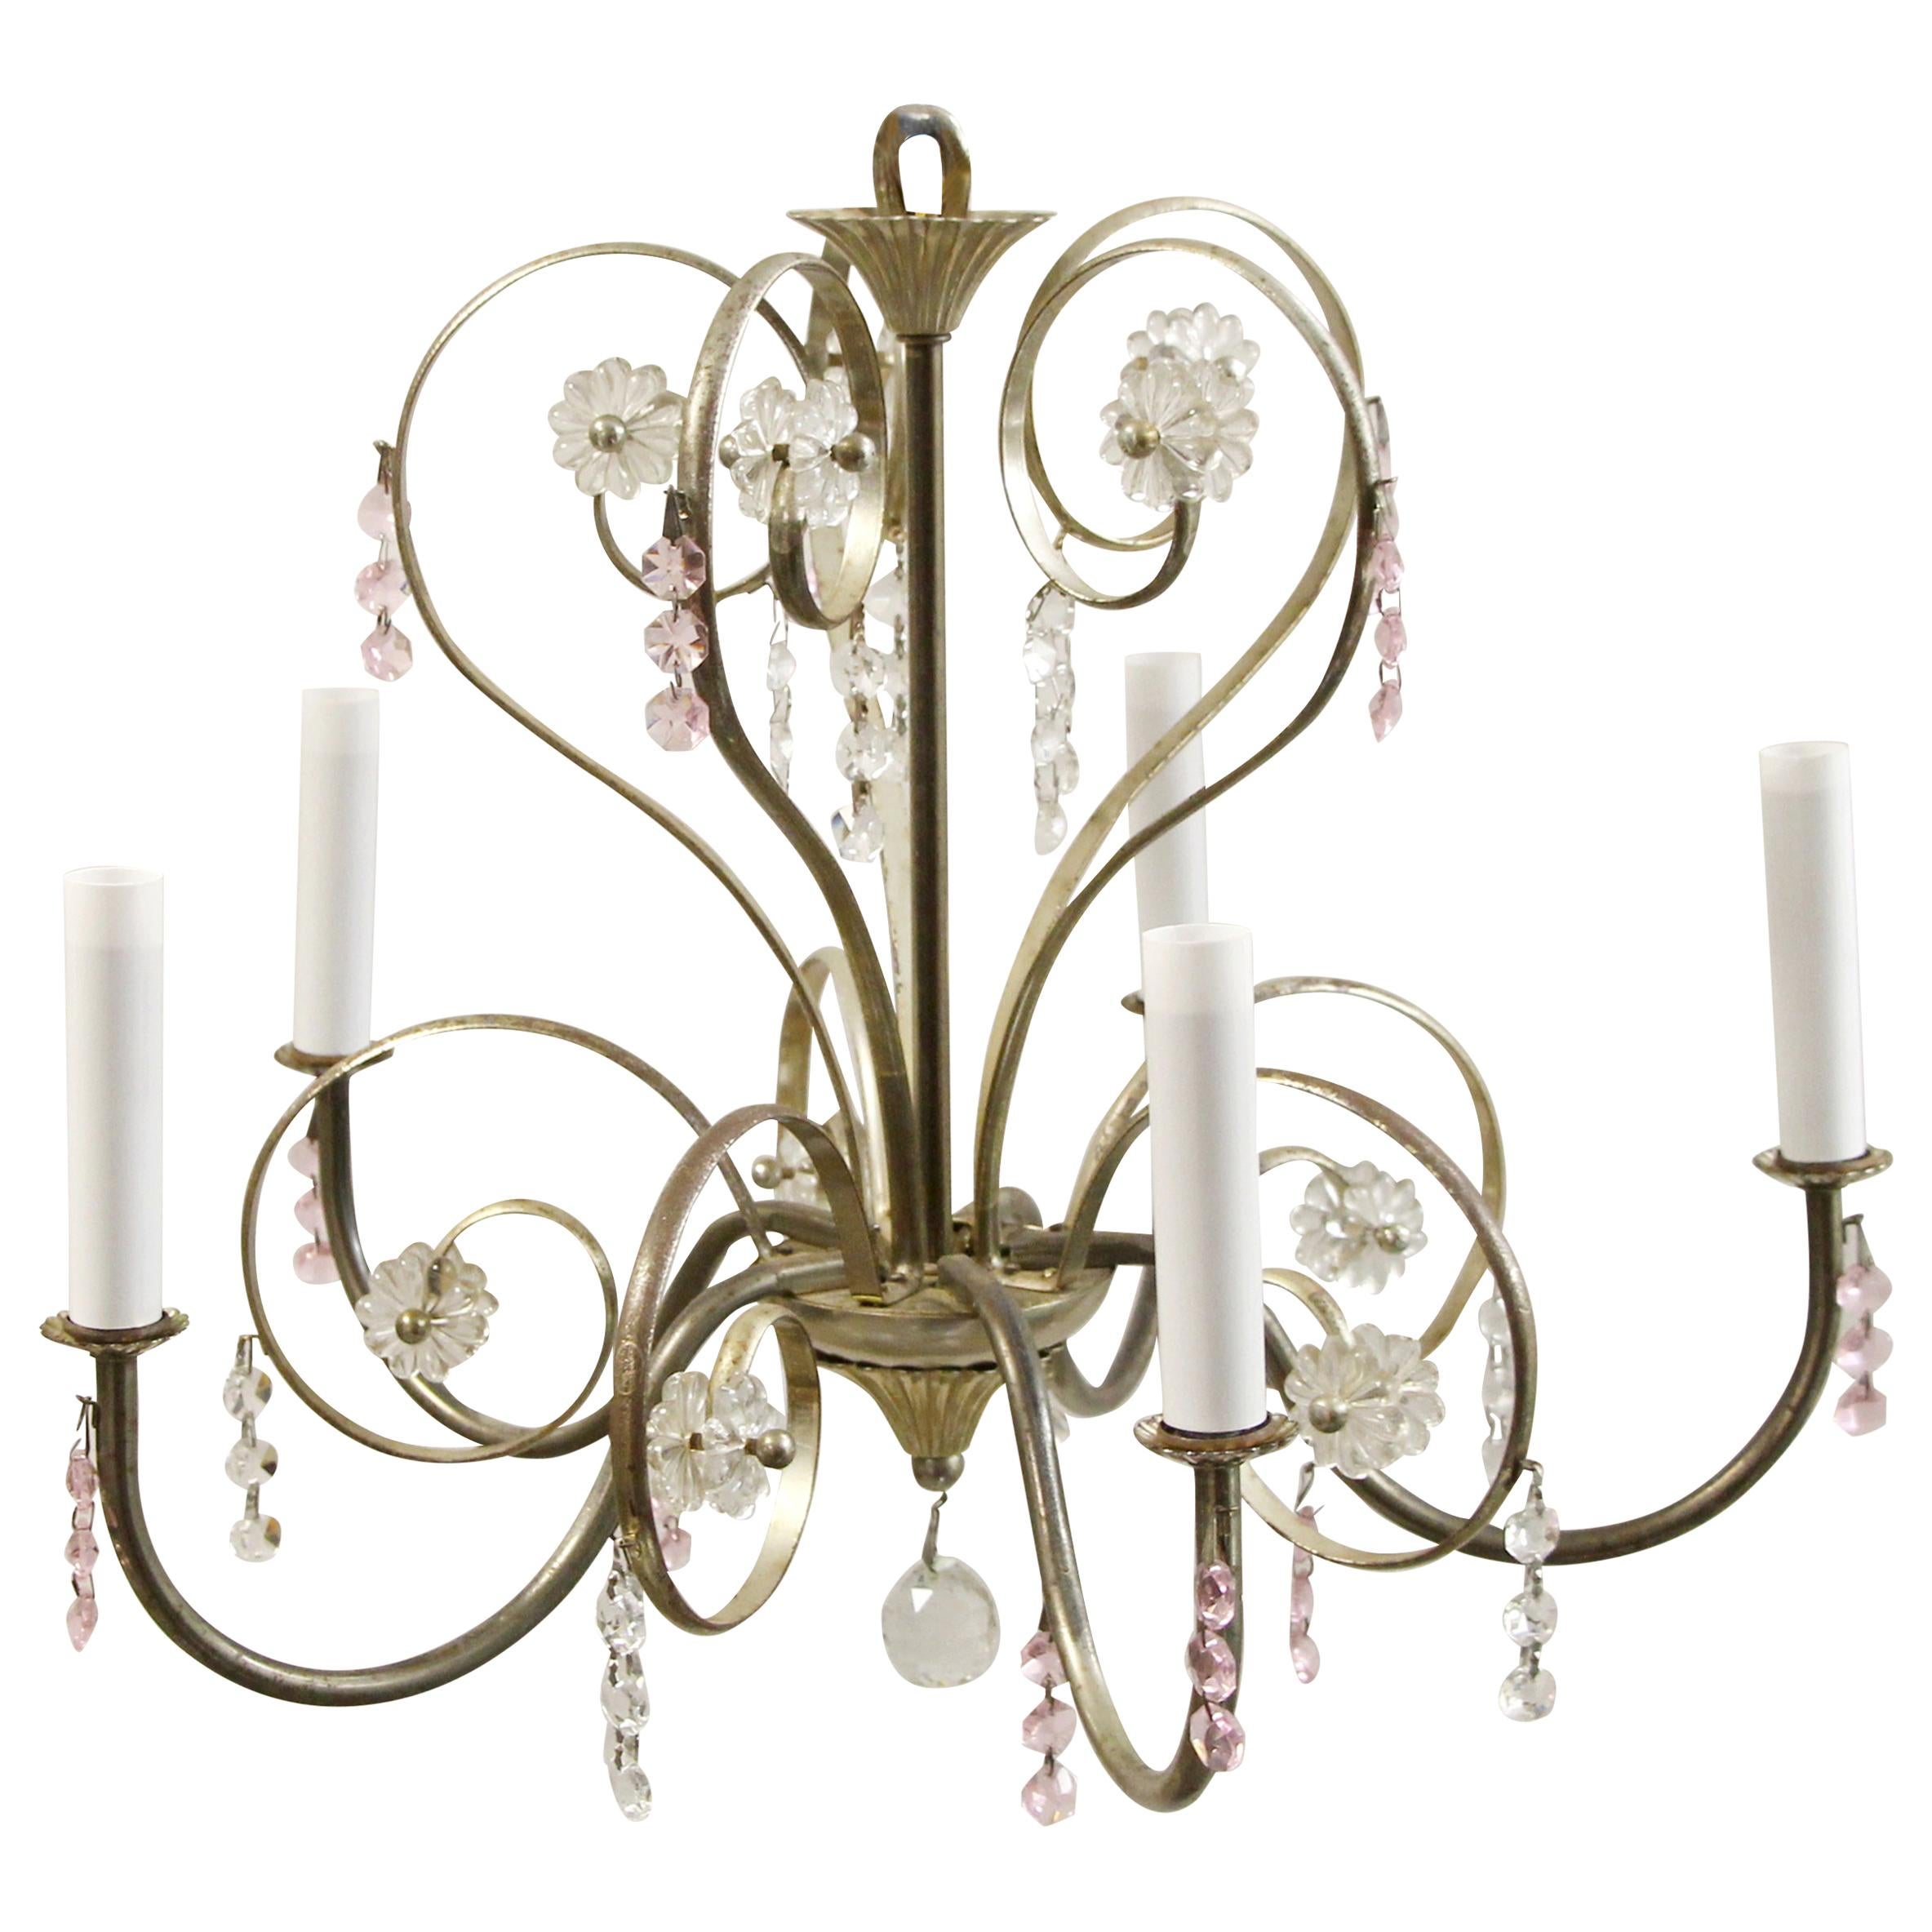 1990s 5 Arm Petite Nickel Plated Floral Style Chandelier For Sale